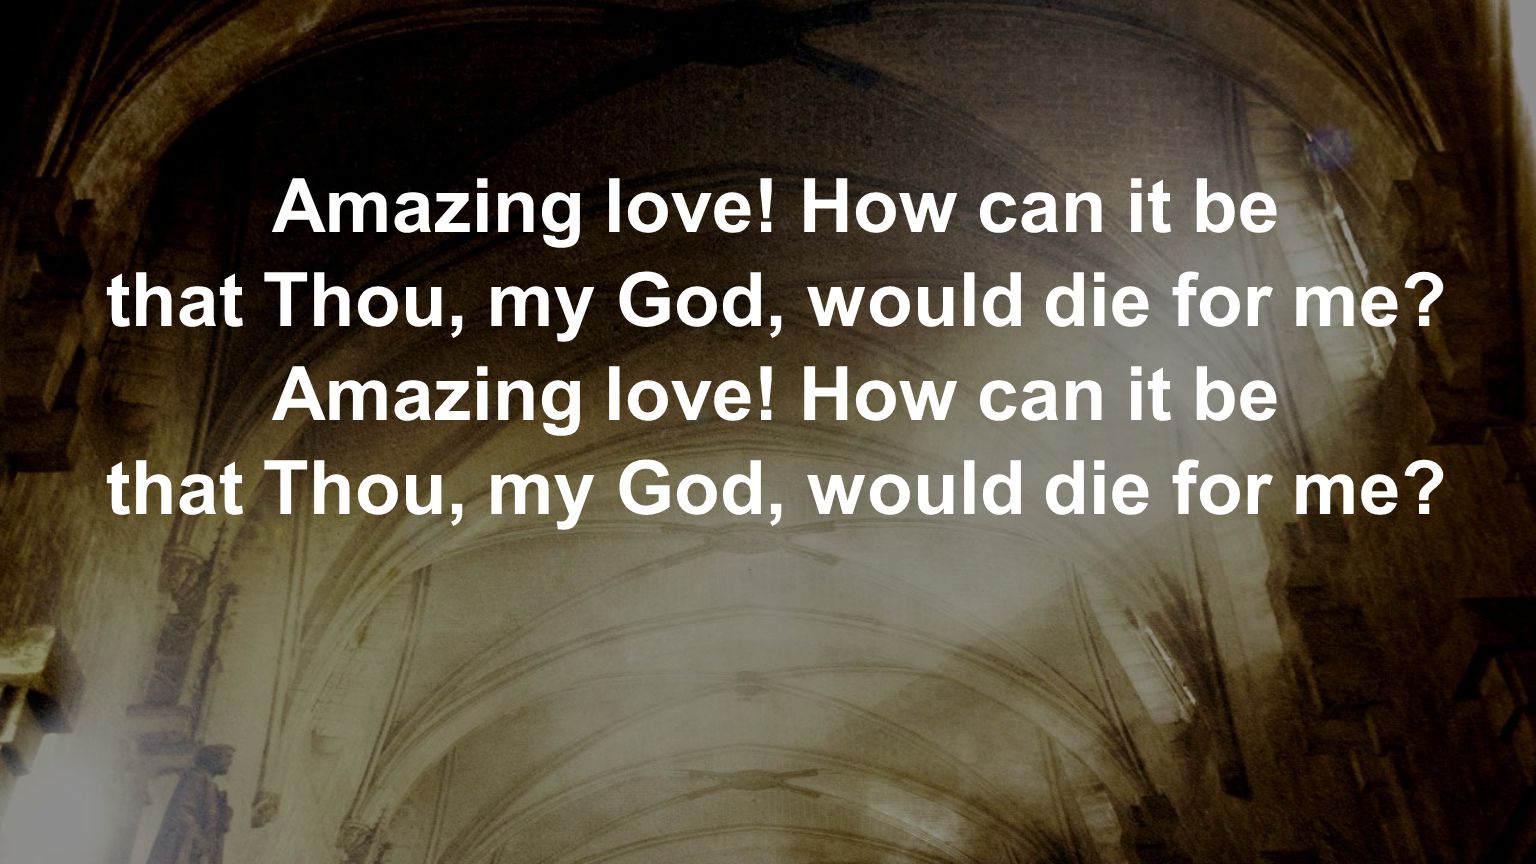 Amazing love! How can it be that Thou, my God, would die for me